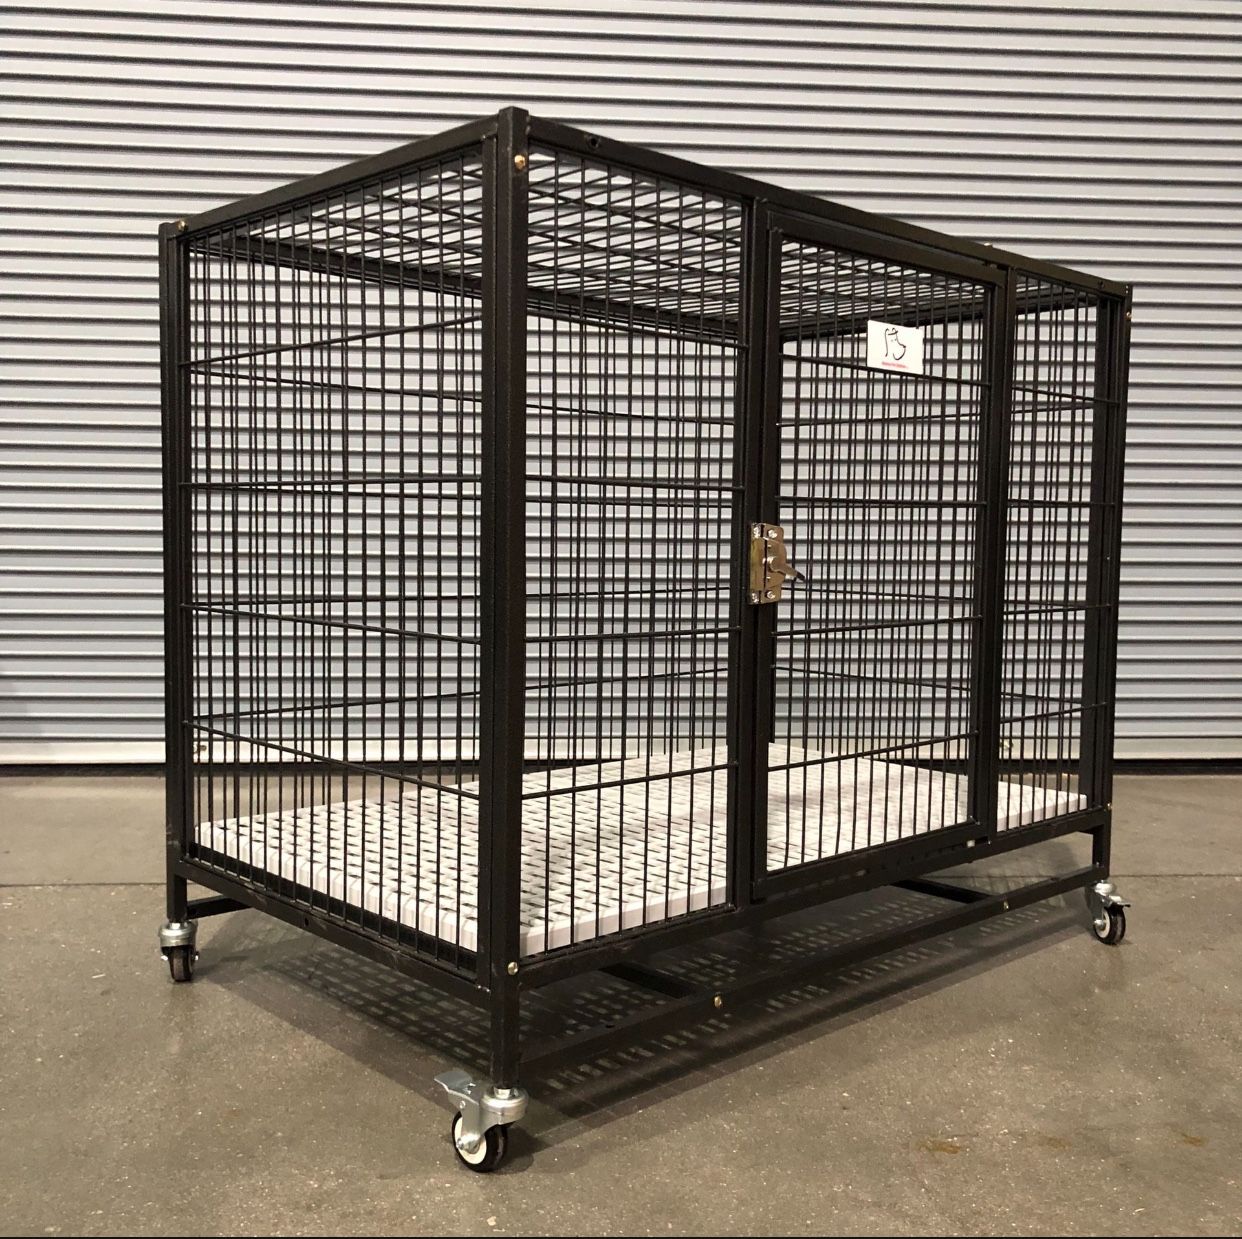 Brandnew HD Dog Kennel Crate Cage W/ Tray & Casters 🐶🐶 Dimensions: 37”L X 23”W X 30”H ✅ 🥳 🎁PLASTIC FLOOR 